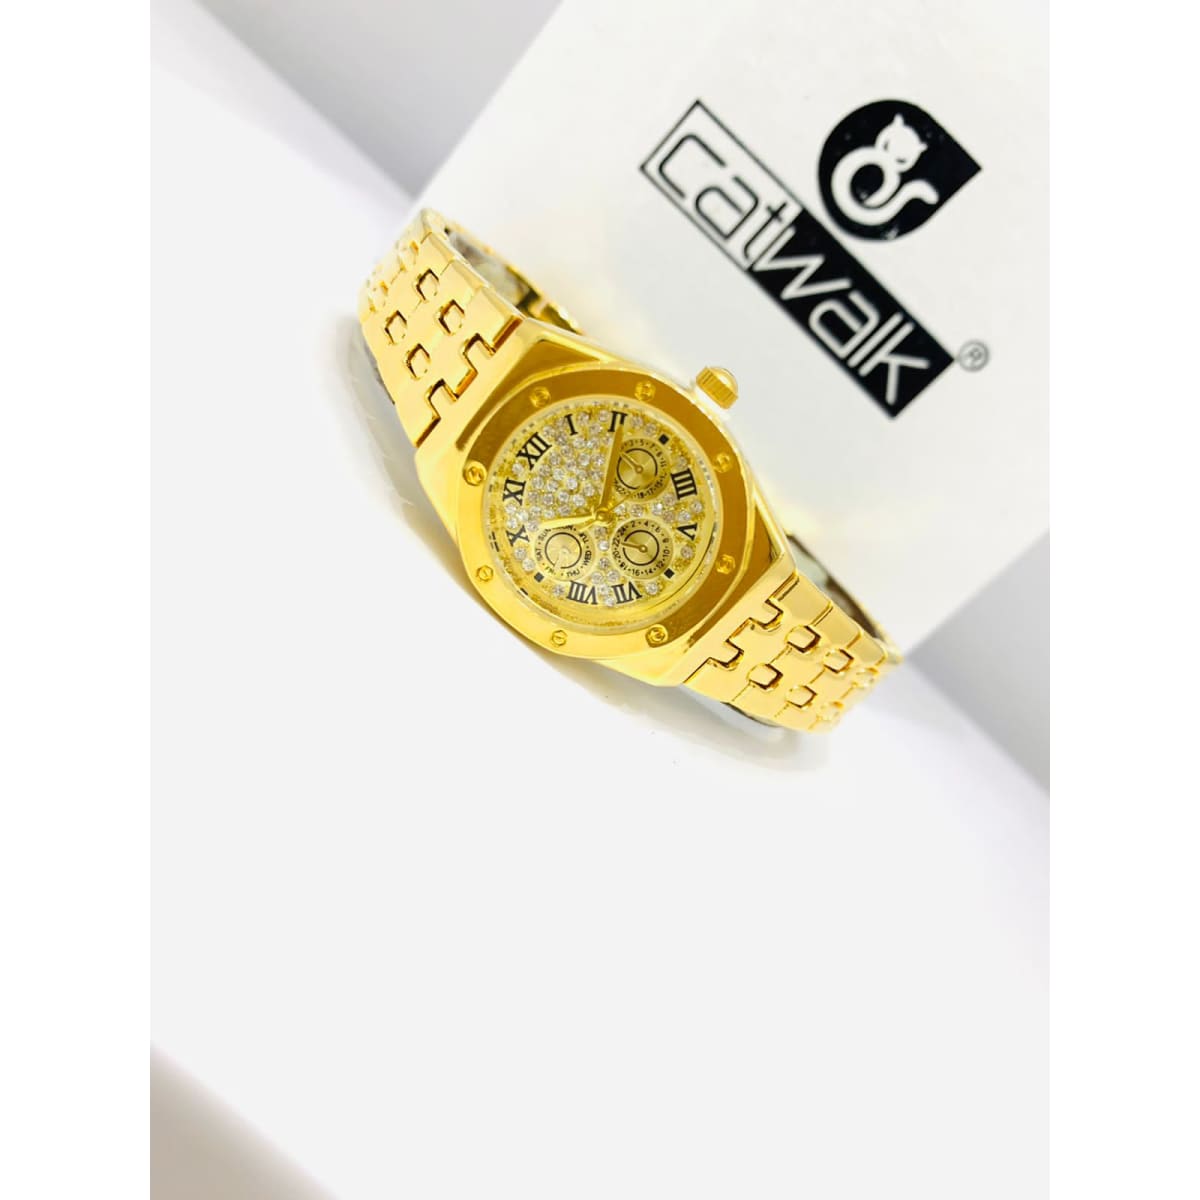 Catwalk CW2022/4 Fashionable Cz Stone Covered Analog Stainless Steel Watch for Women with Gift Box Shop